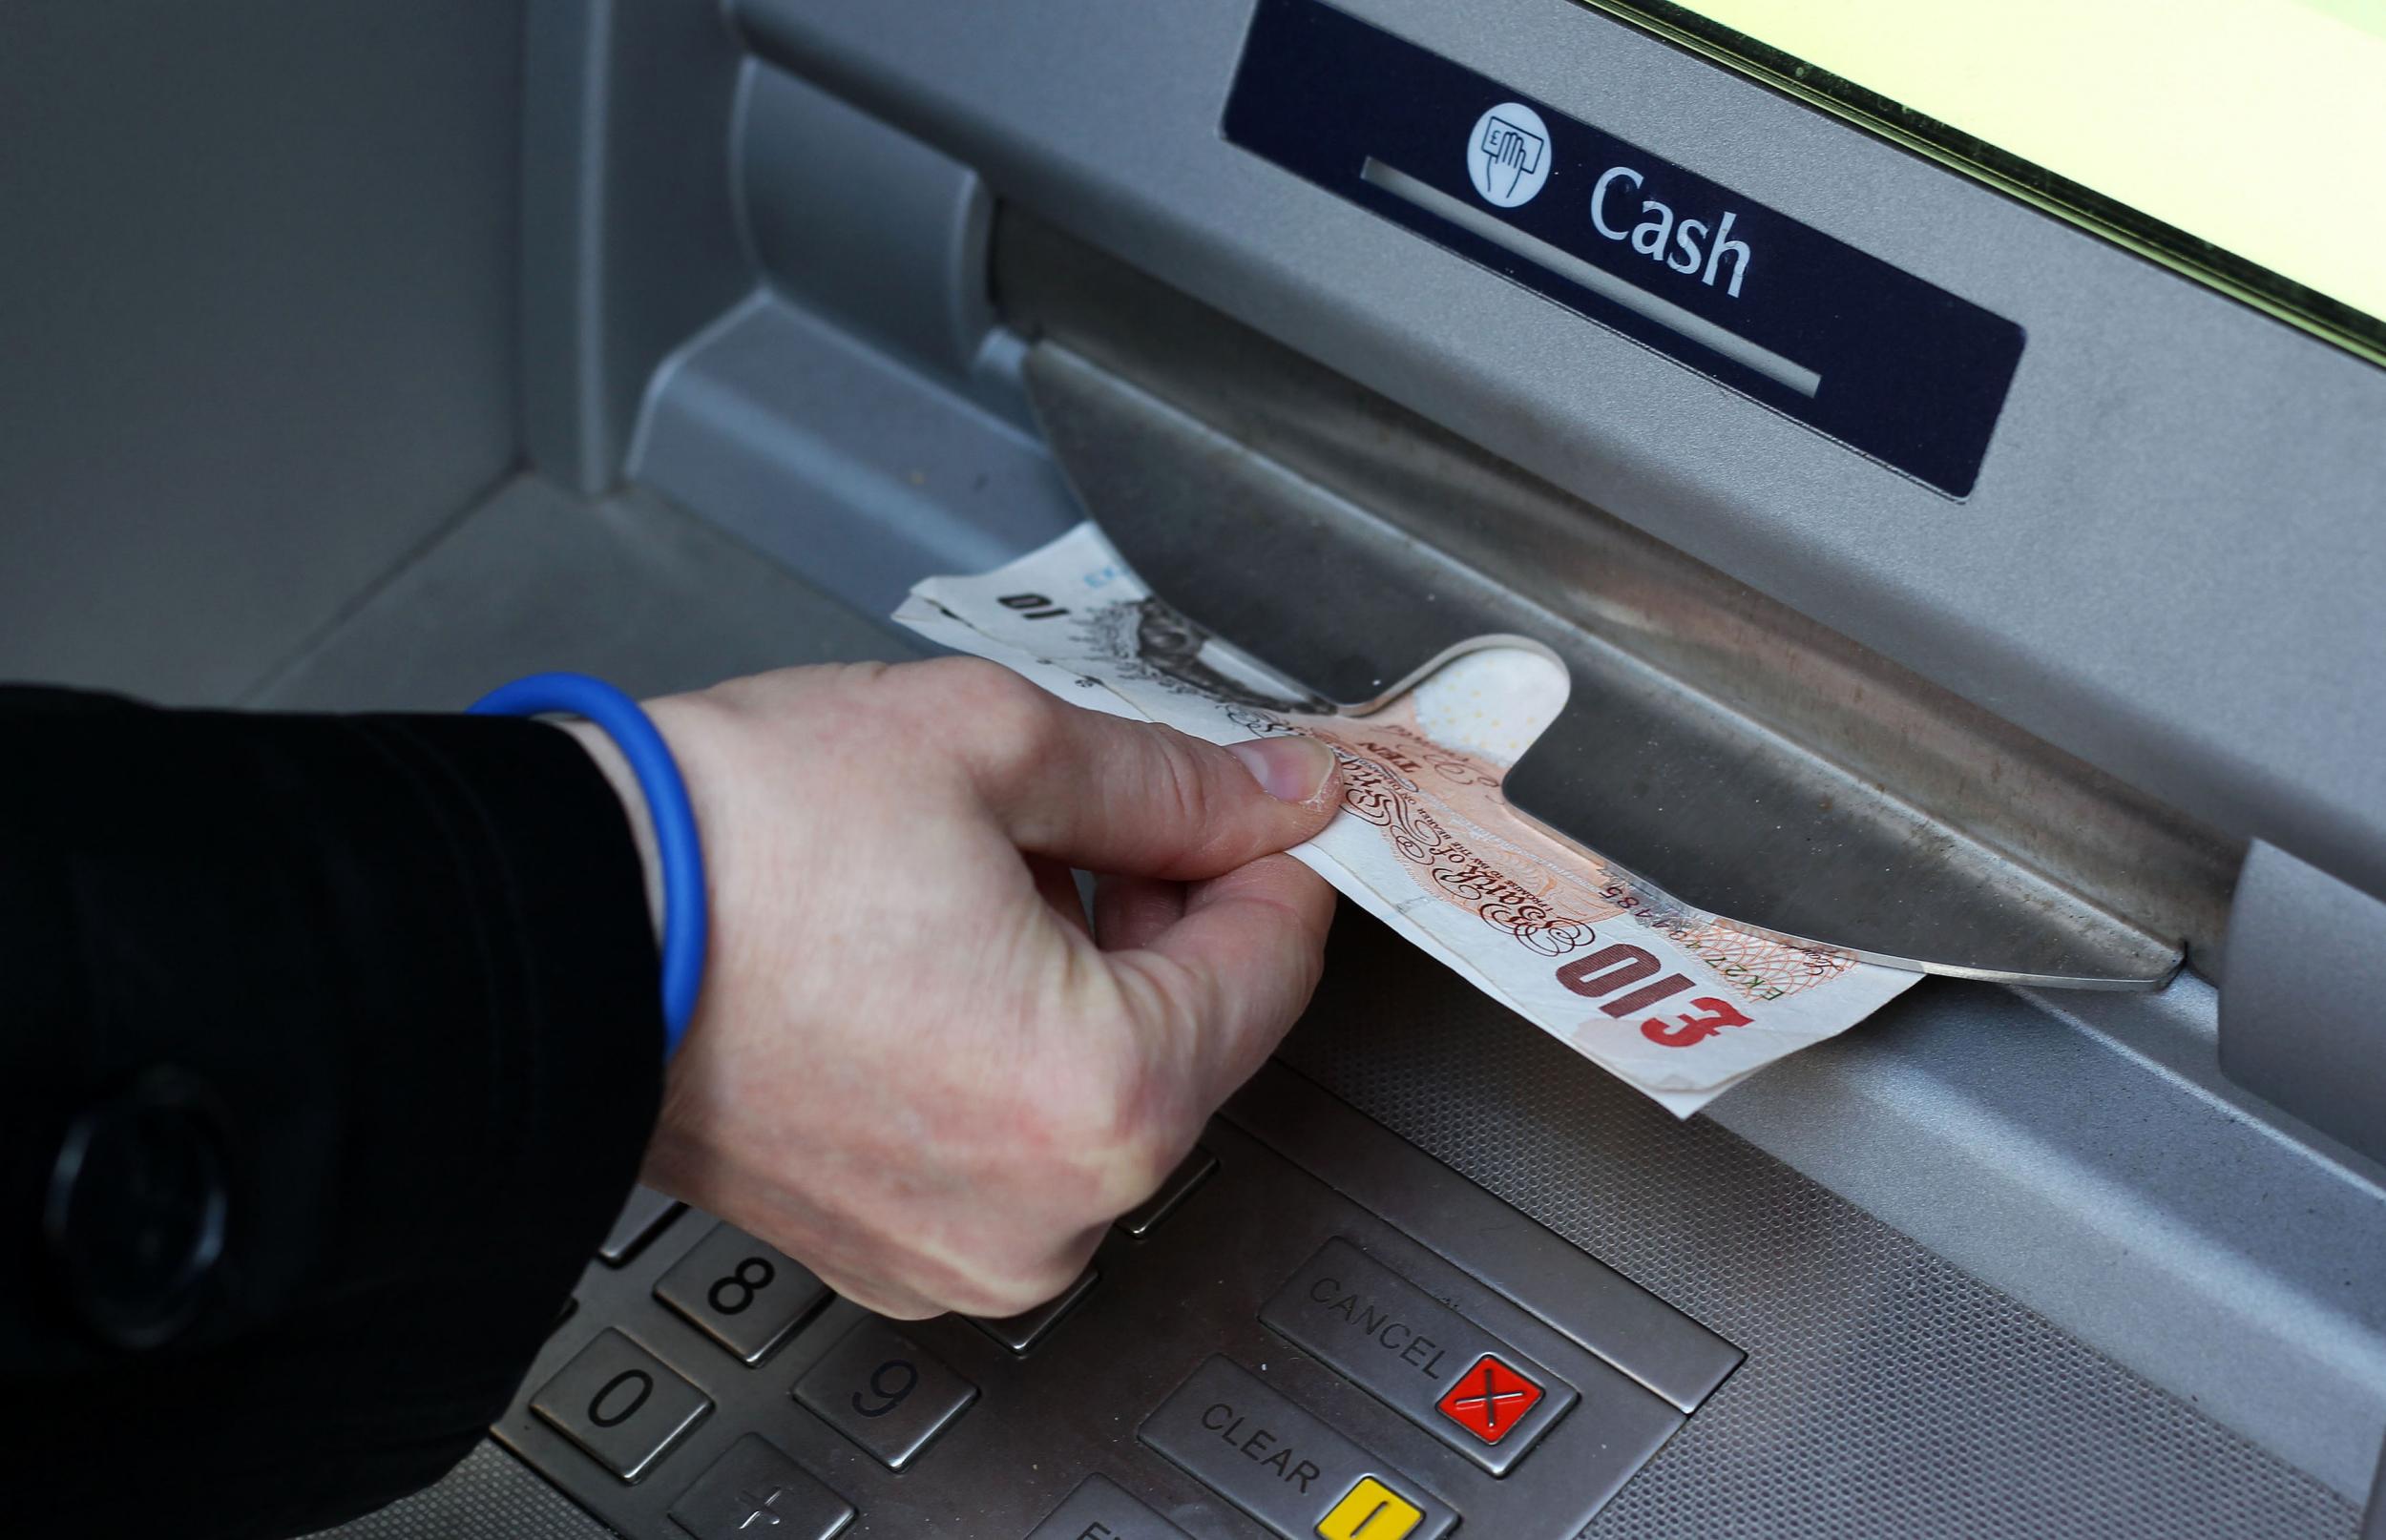 New changes set to come in from Sunday will mean cash machine operators are paid less for transactions on some ATMs